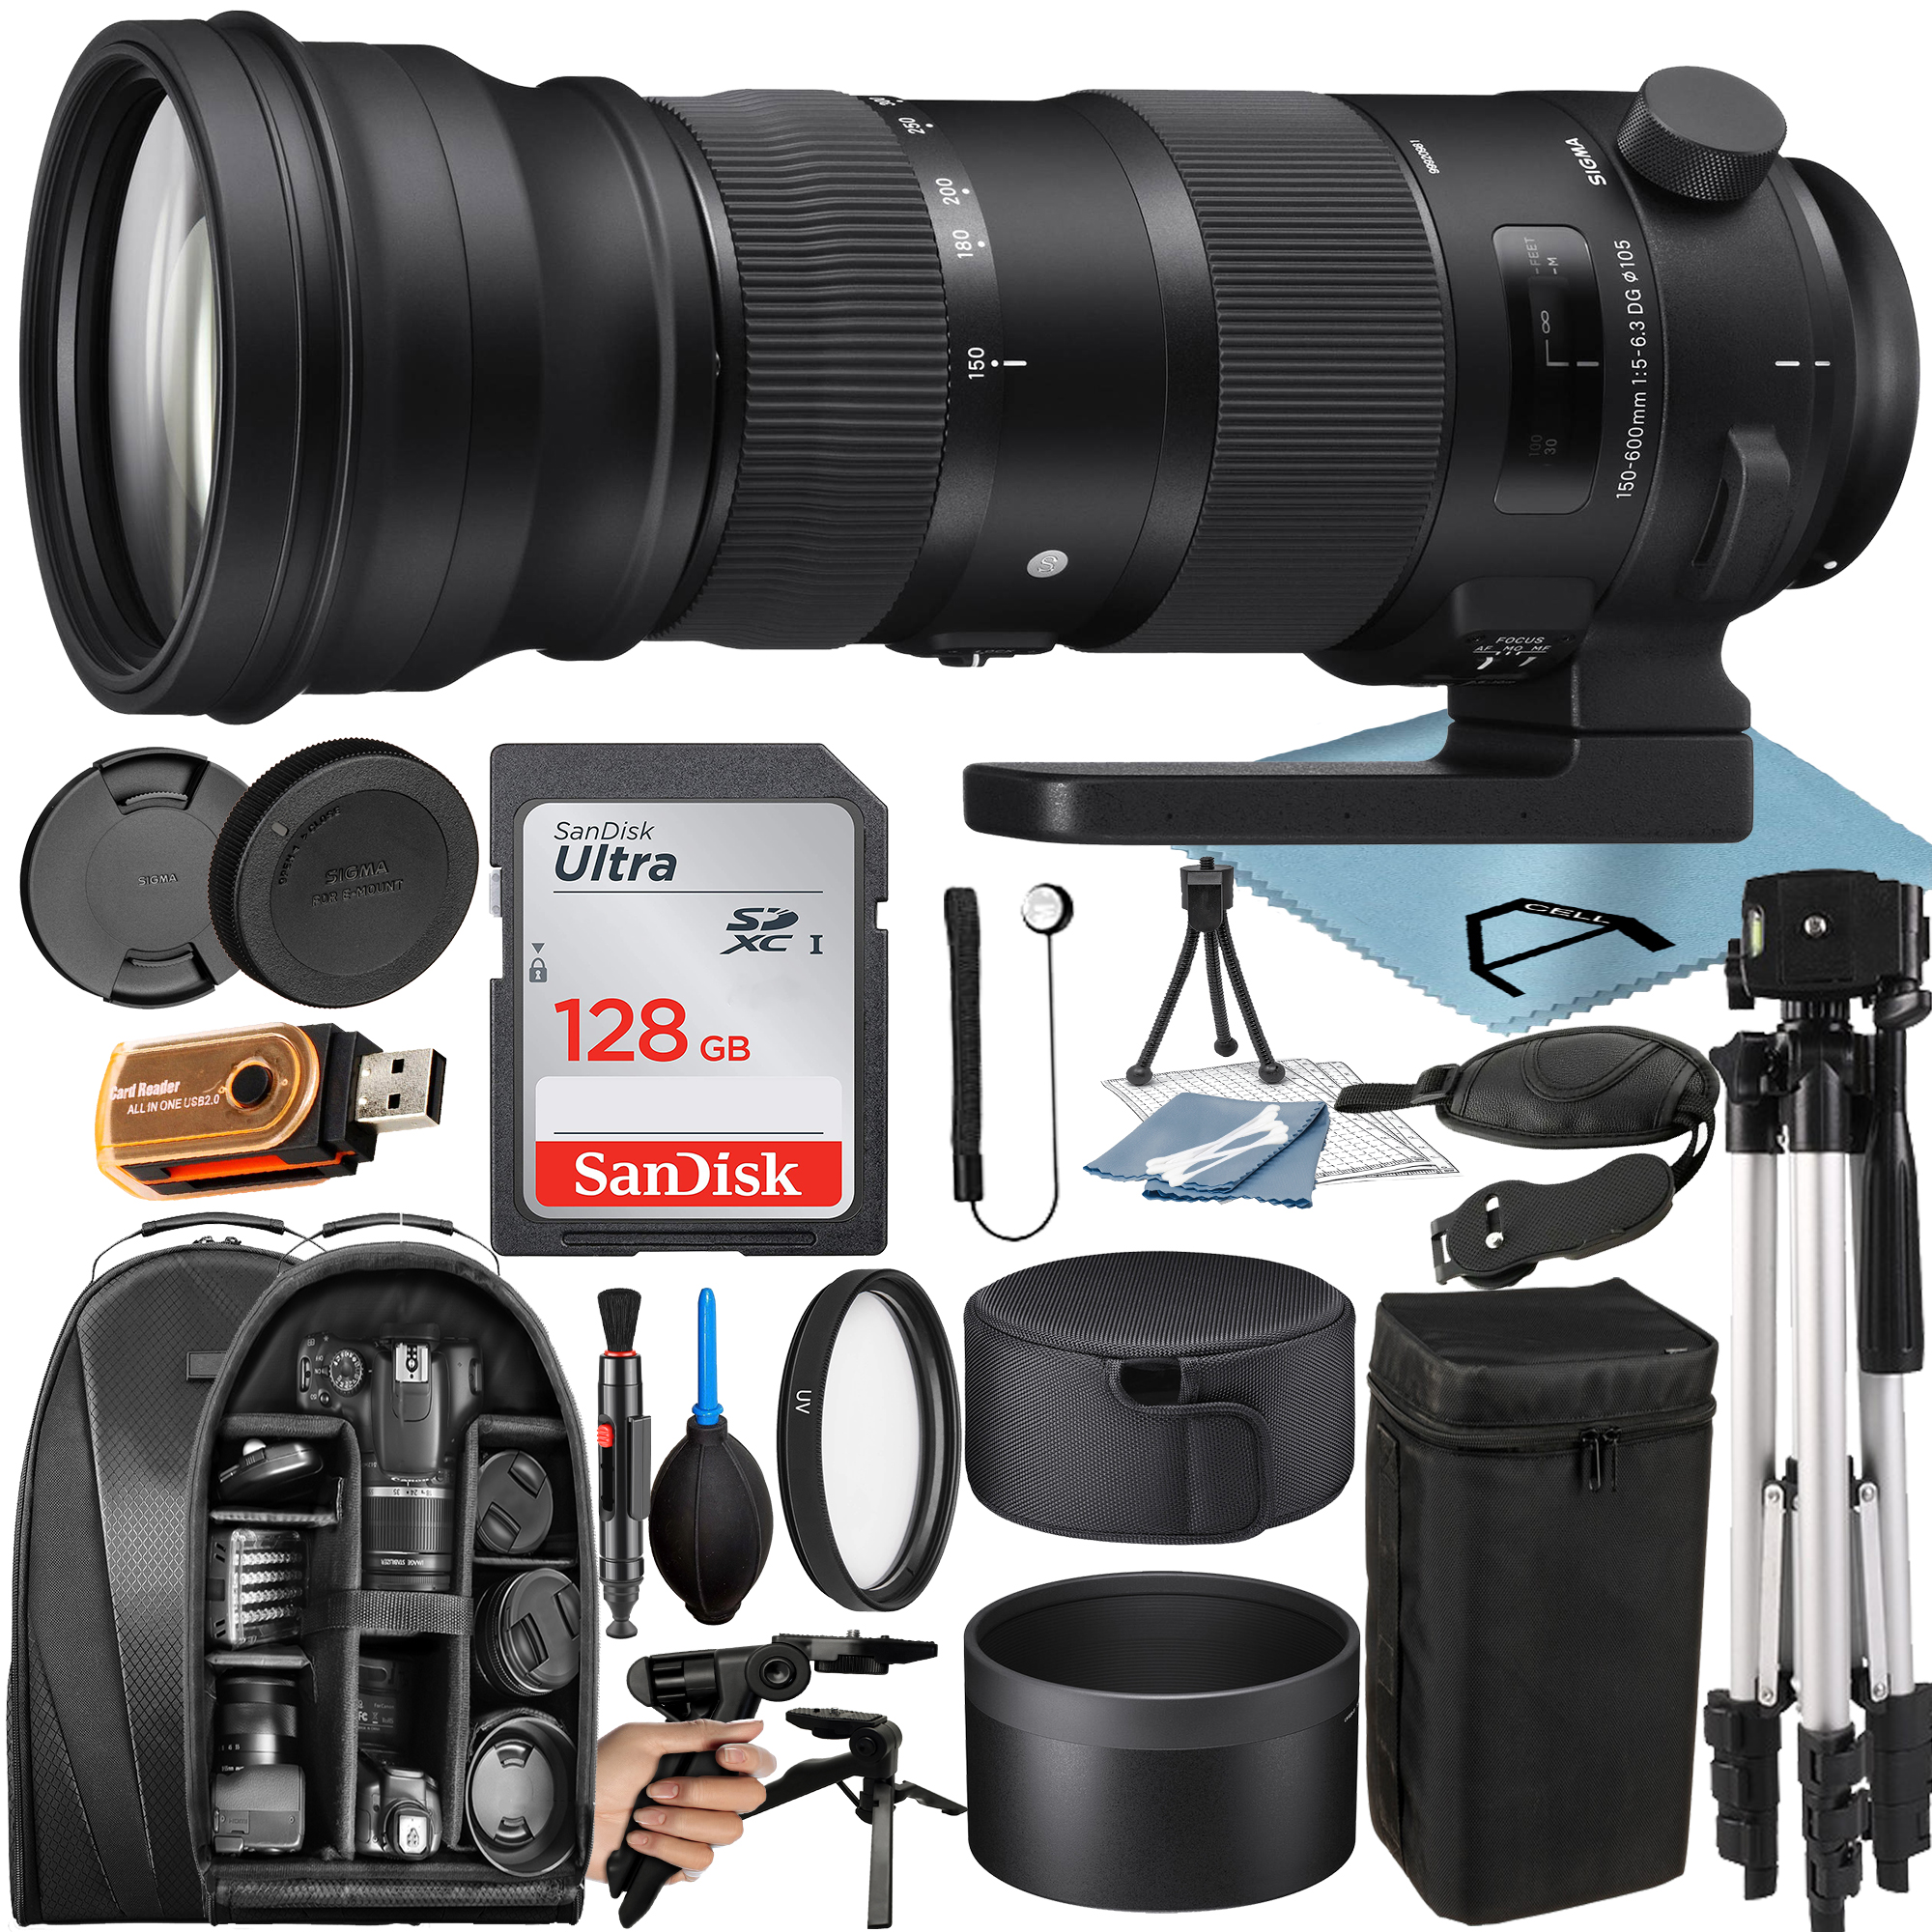 Sigma 150-600mm F/5-6.3 DG OS HSM Sports Lens for Canon EF with 128GB SanDisk Memory Card + Tripod + Backpack + A-Cell Accessory Bundle